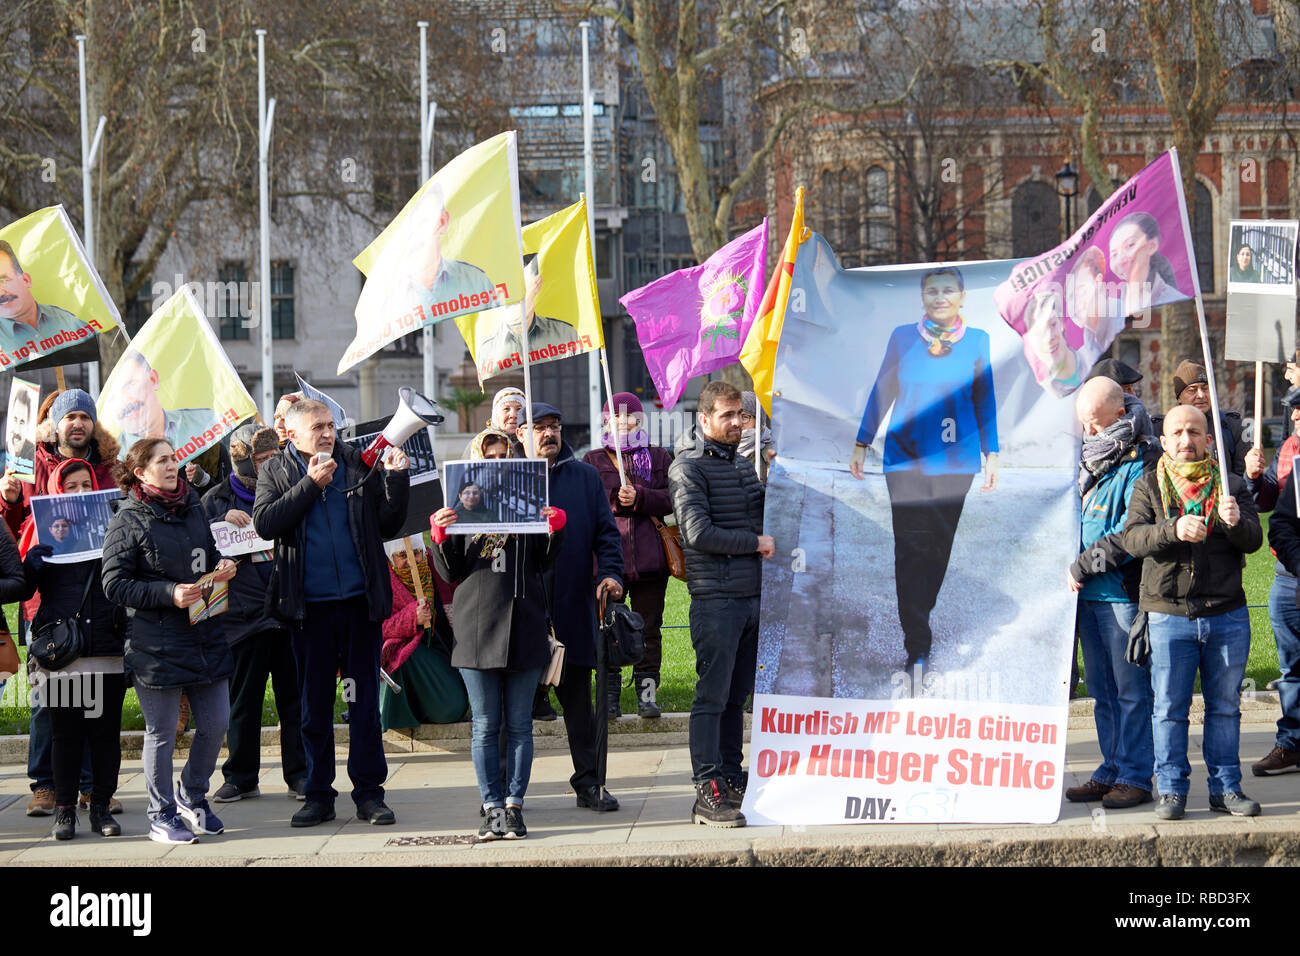 London, UK - January 9, 2019: Kurdish Protestors outside Parliament in support of MP Leyla Guven who has been on hunger strike since Nov 7 in support of Kurdish leader Abdullah Ocalan. Credit: Kevin J. Frost/Alamy Live News Stock Photo